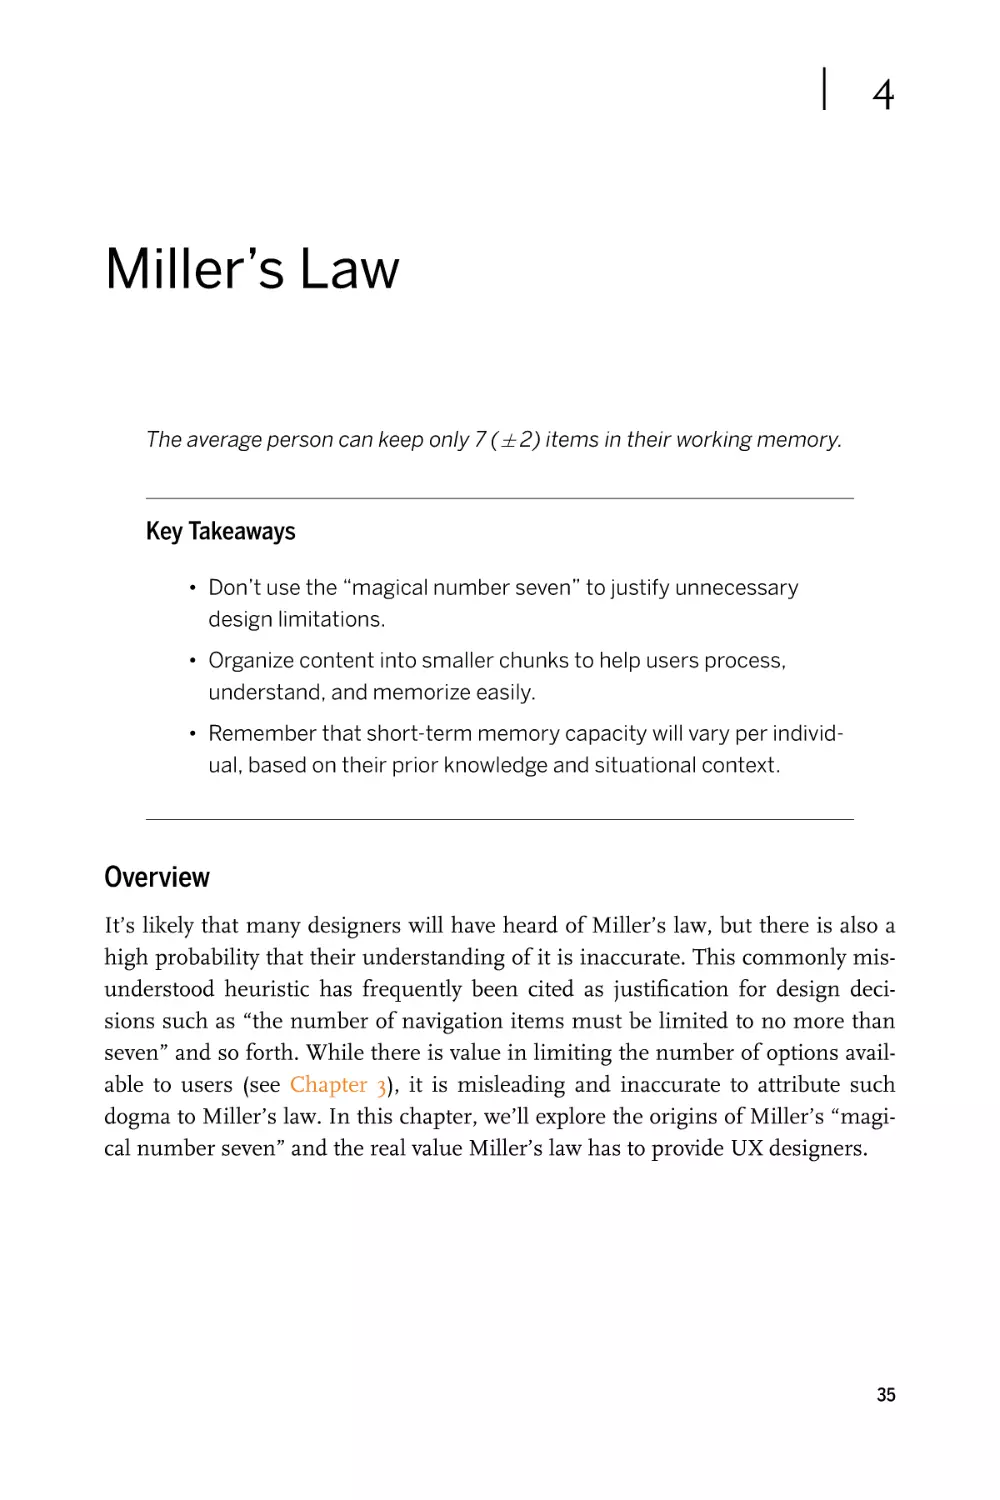 Chapter 4. Miller’s Law
Overview